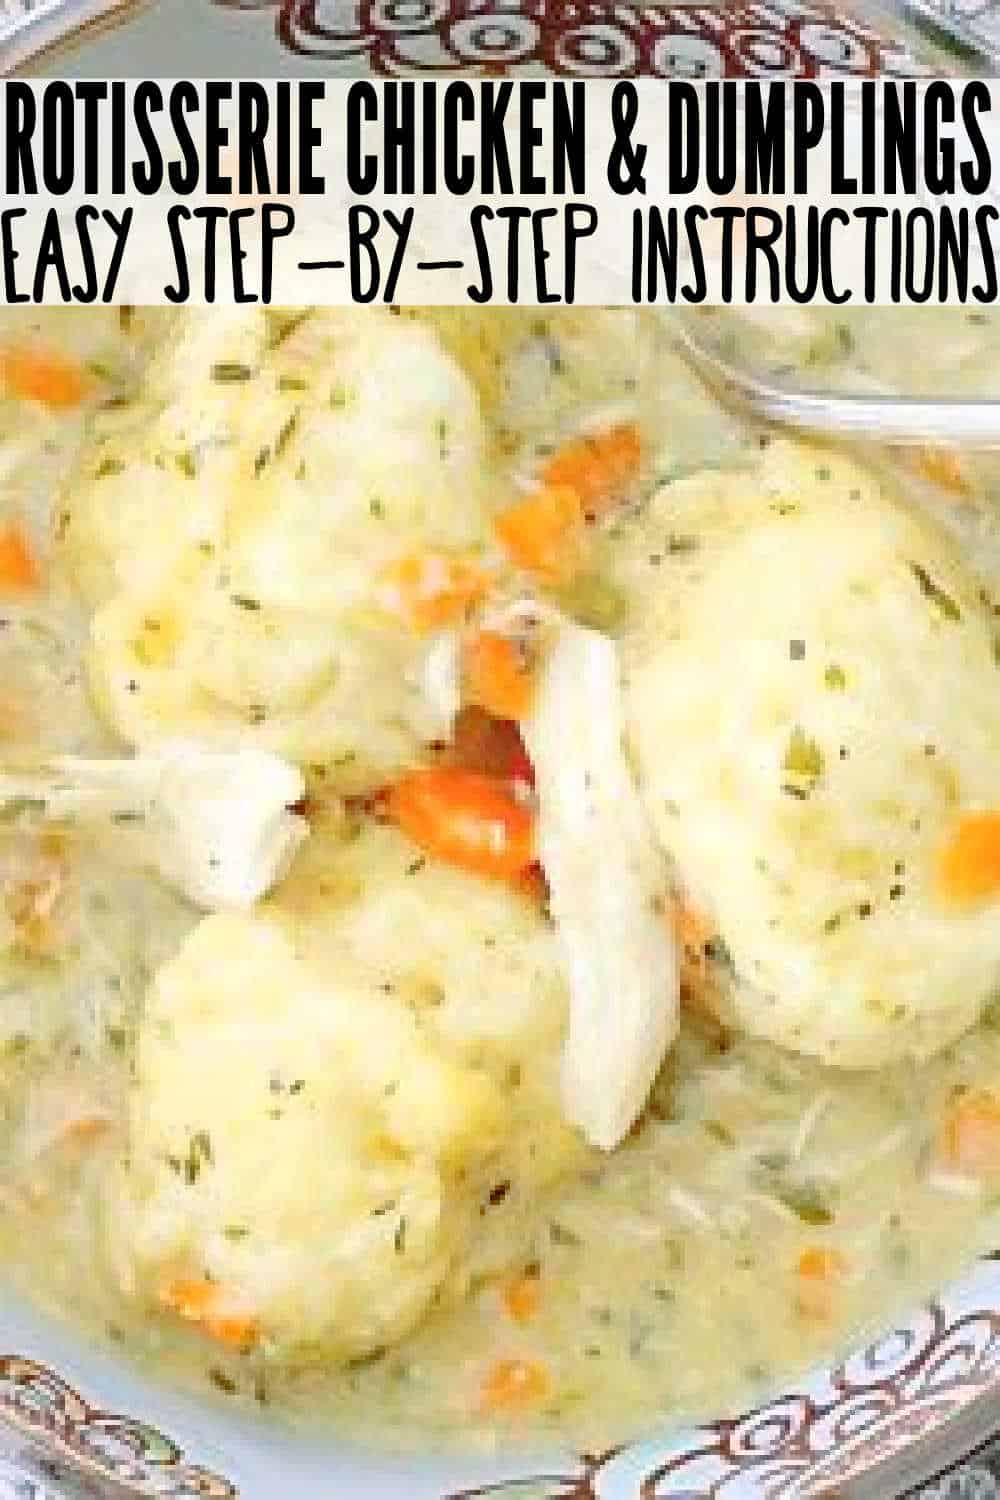 My recipe for rotisserie chicken and dumplings has thousands of fans. The chicken stew takes help from a rotisserie chicken, but the dumplings are made from-scratch and practically fool-proof. via @foodtasticmom